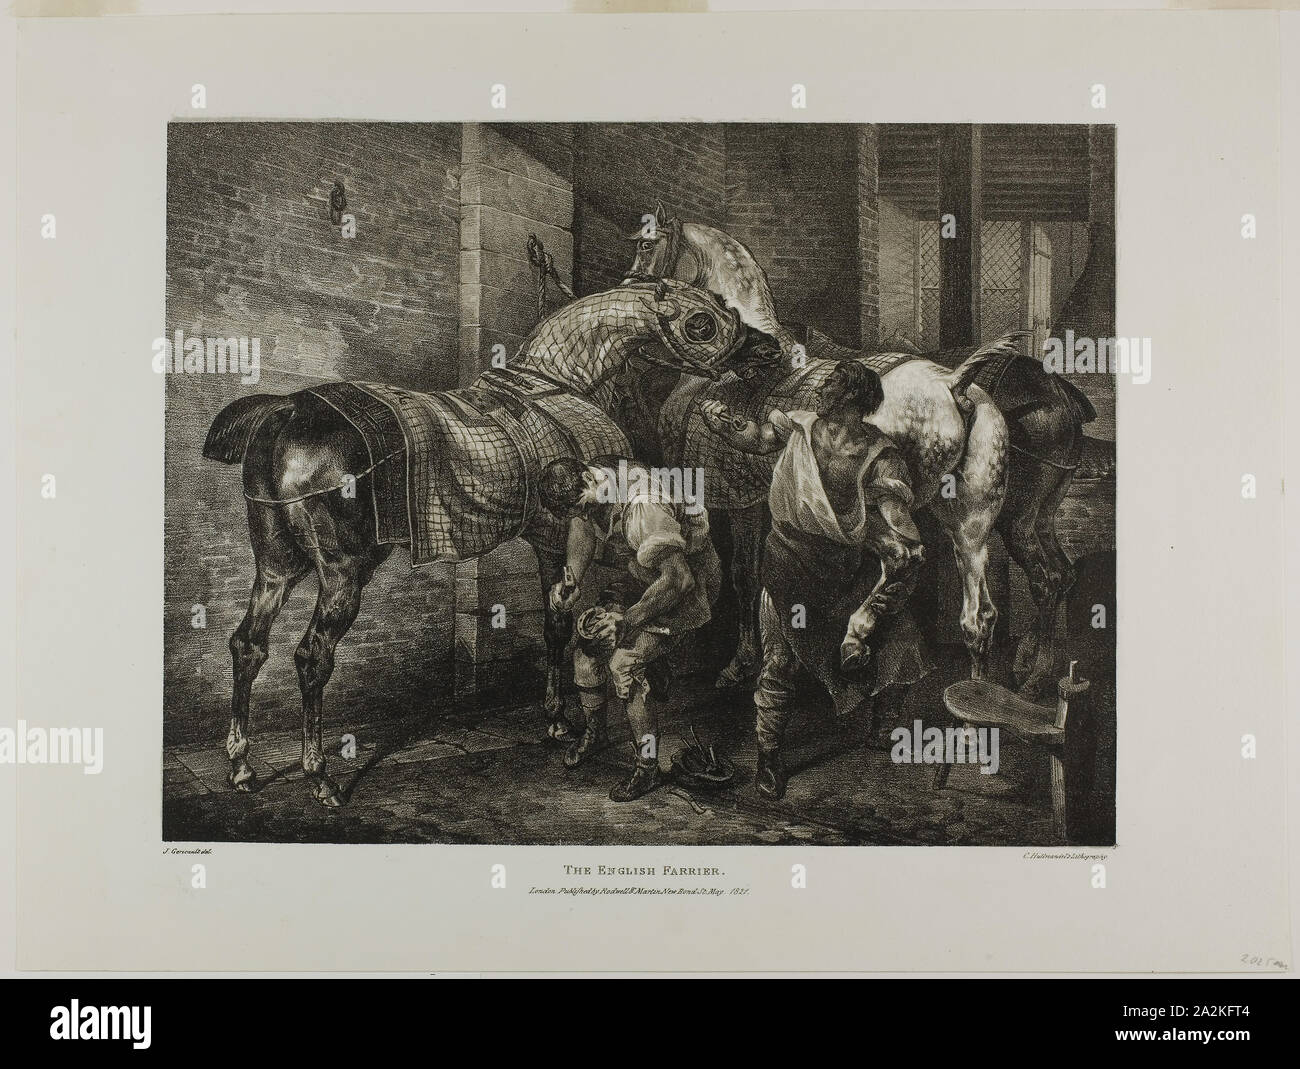 The English Farrier, plate 10 from Various Subjects Drawn from Life on Stone, 1821, Jean Louis André Théodore Géricault (French, 1791-1824), printed by Charles Joseph Hullmandel (German and English, 1789-1850), published by Rodwell and Martin, France, Lithograph in black with gray-green tint stone on ivory wove paper, 284 × 372 mm (image), 376 × 495 mm (sheet Stock Photo